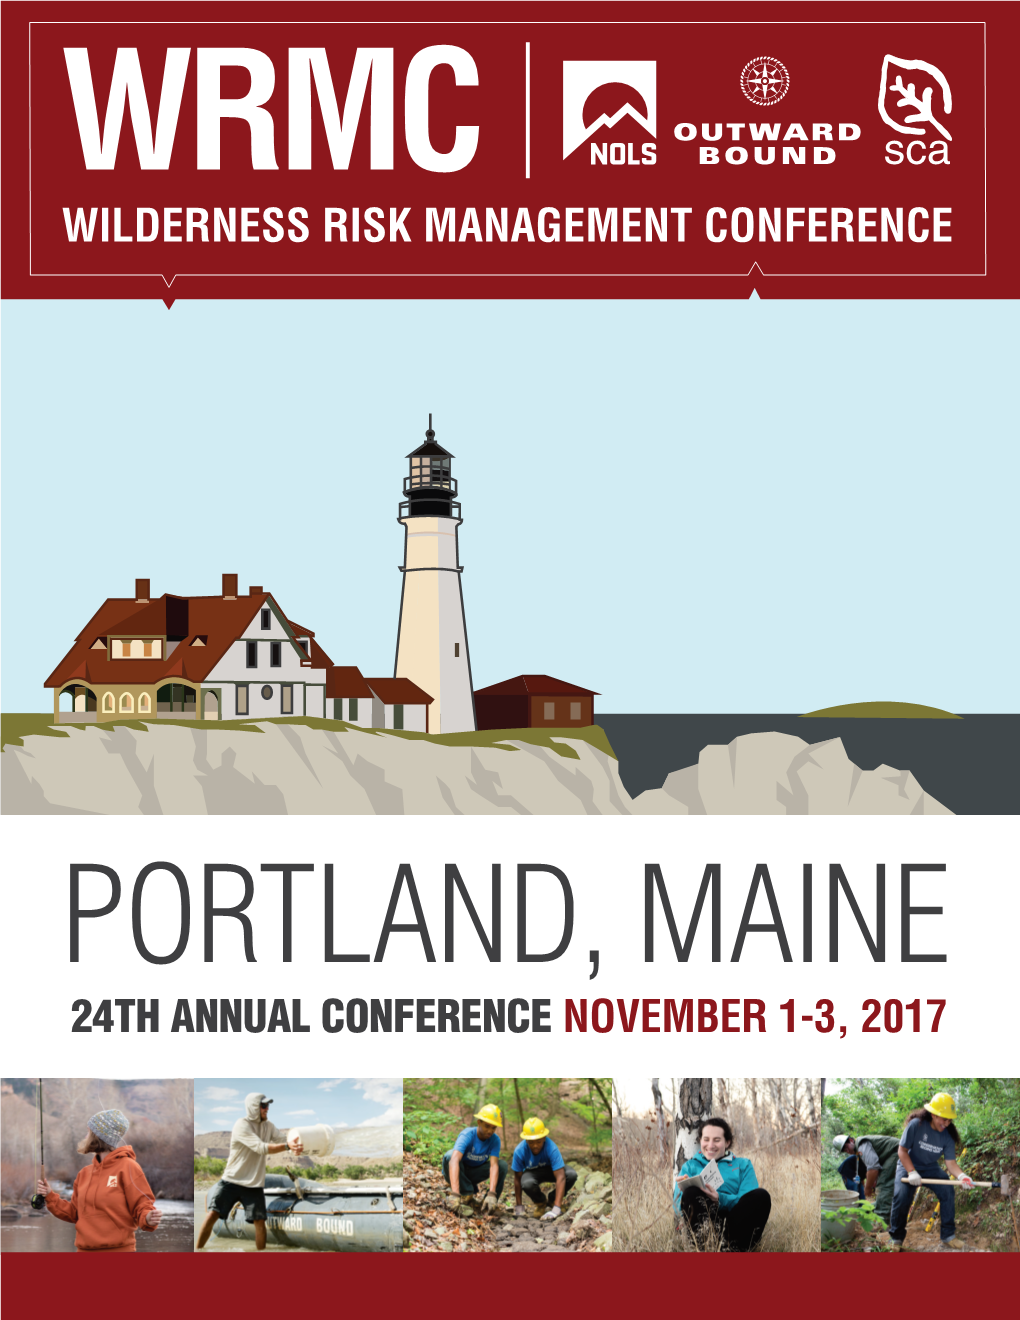 24TH ANNUAL CONFERENCE NOVEMBER 1-3, 2017 Welcome to the 2017 Wilderness Risk Management Conference in Portland, Maine!